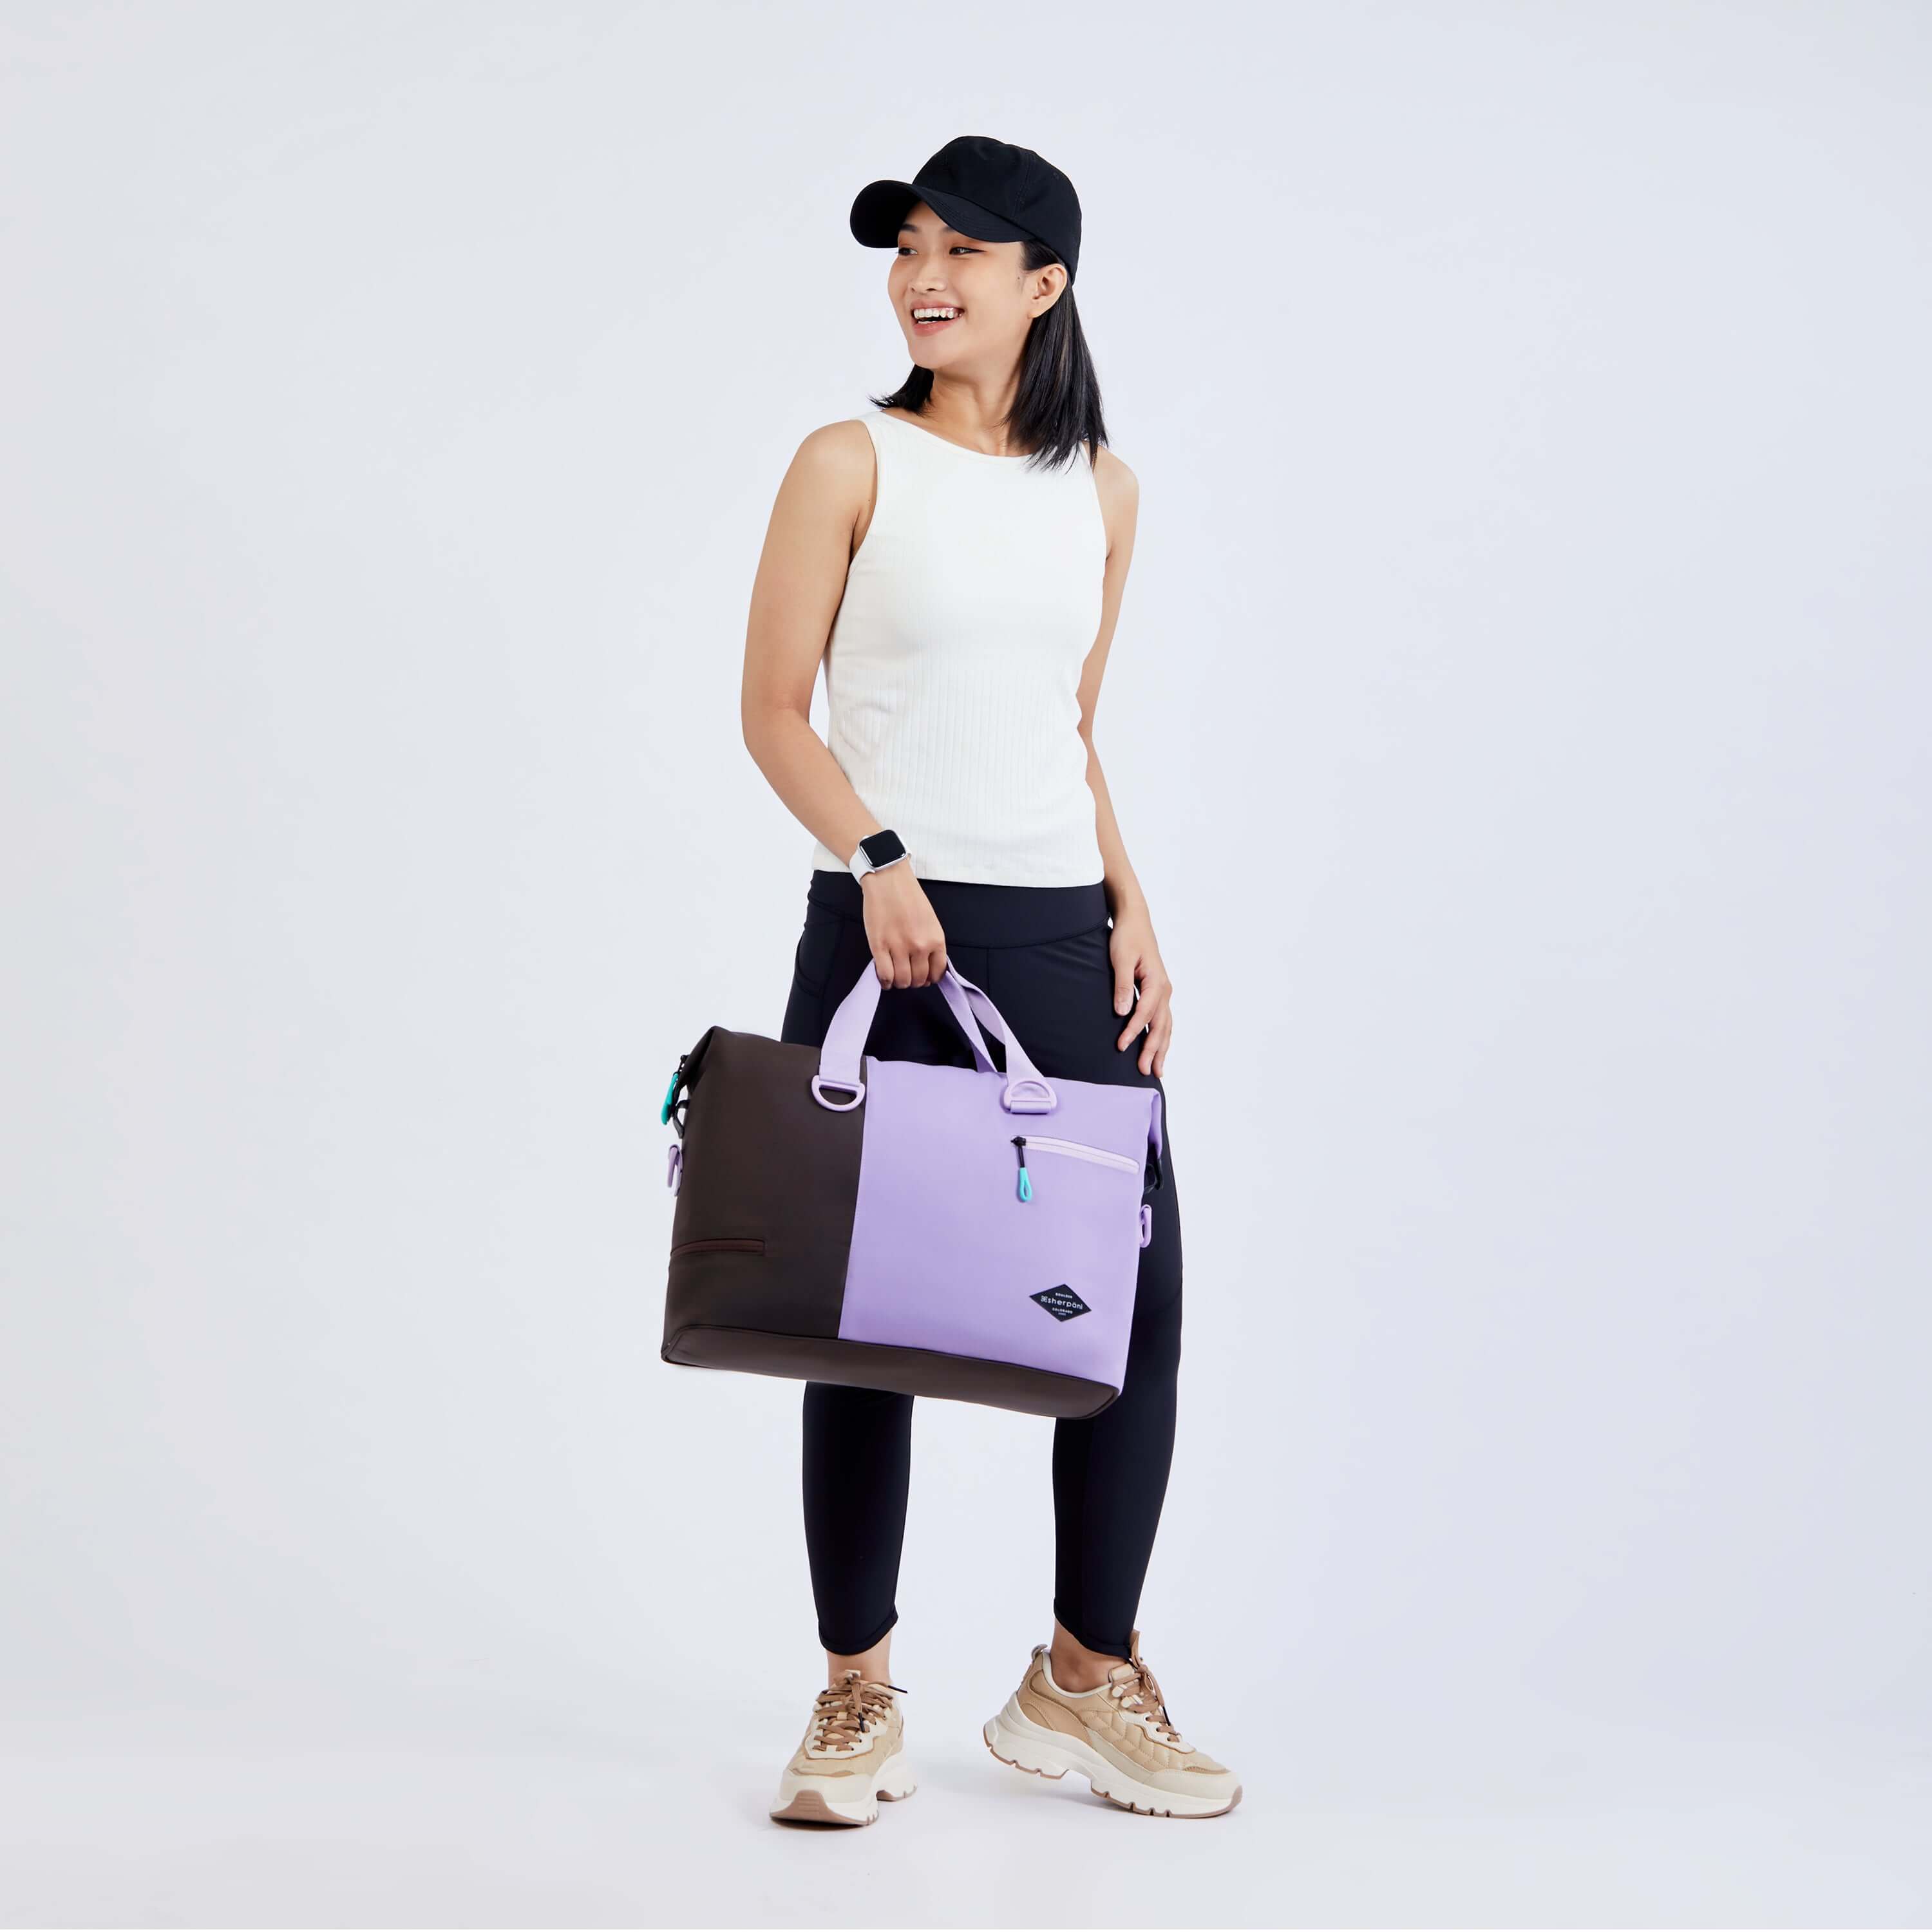 Full body view of a dark haired model facing the camera and smiling over her right shoulder. She is wearing a black ball cap, white tank top, black leggings and sneakers. She carries Sherpani bag, the Sola in Lavender, by the tote handles. 